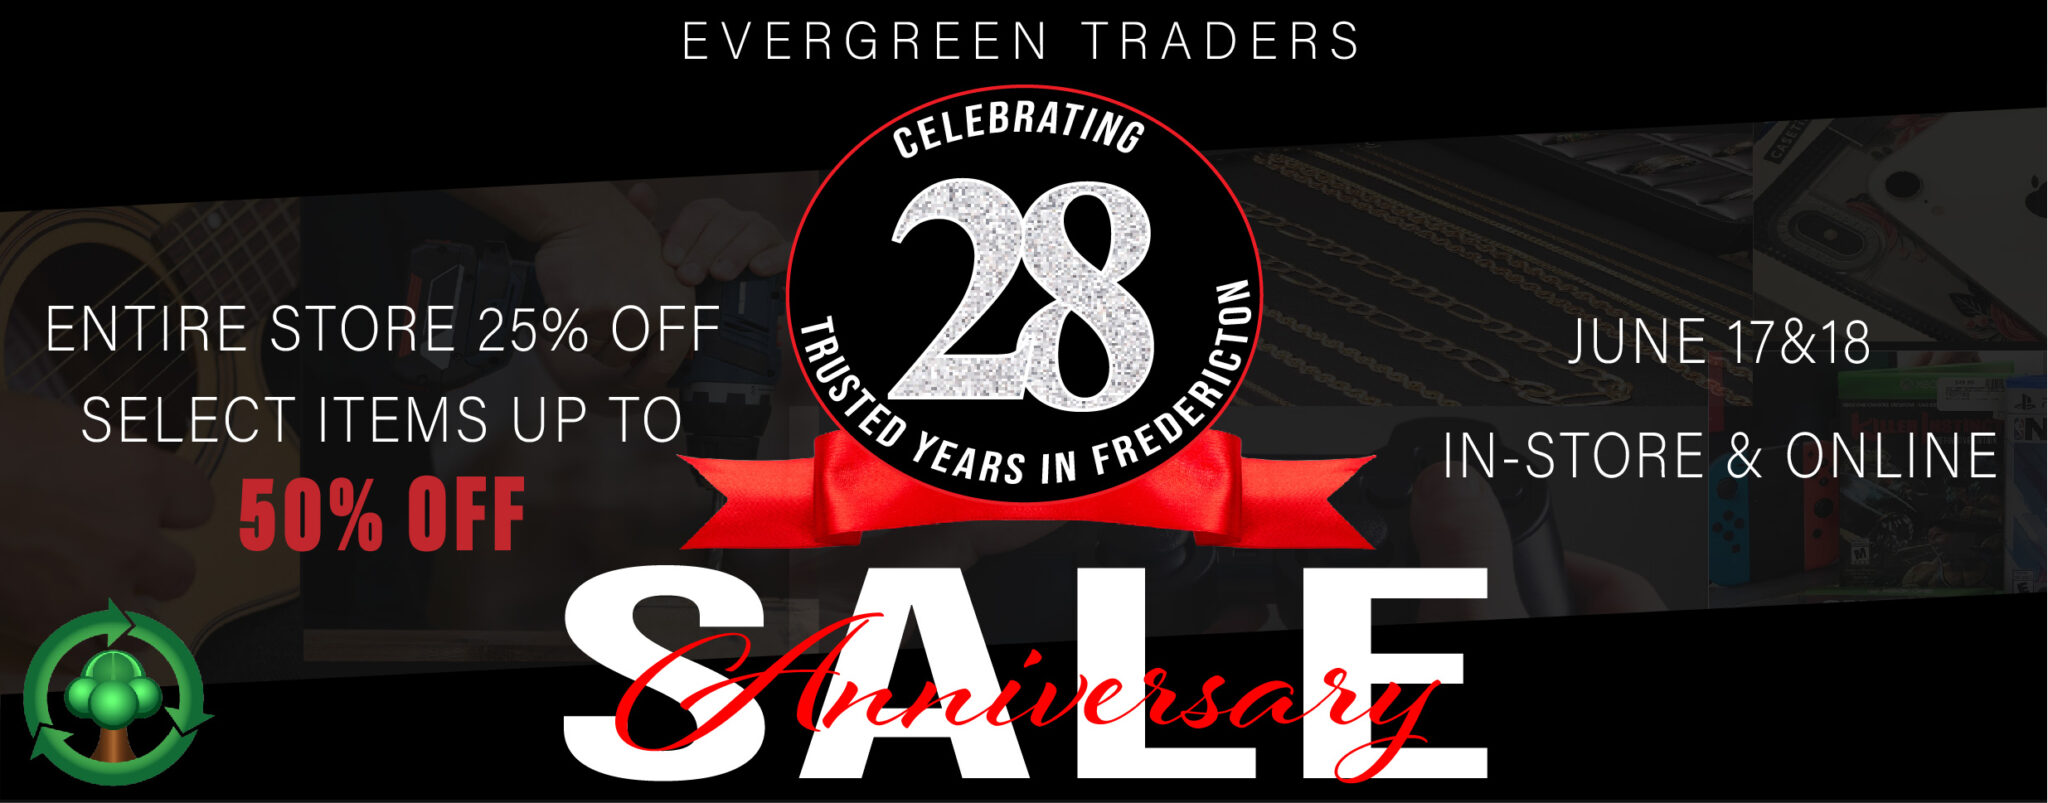 Evergreen Traders’ 28th Anniversary Sale! Save up to 50%